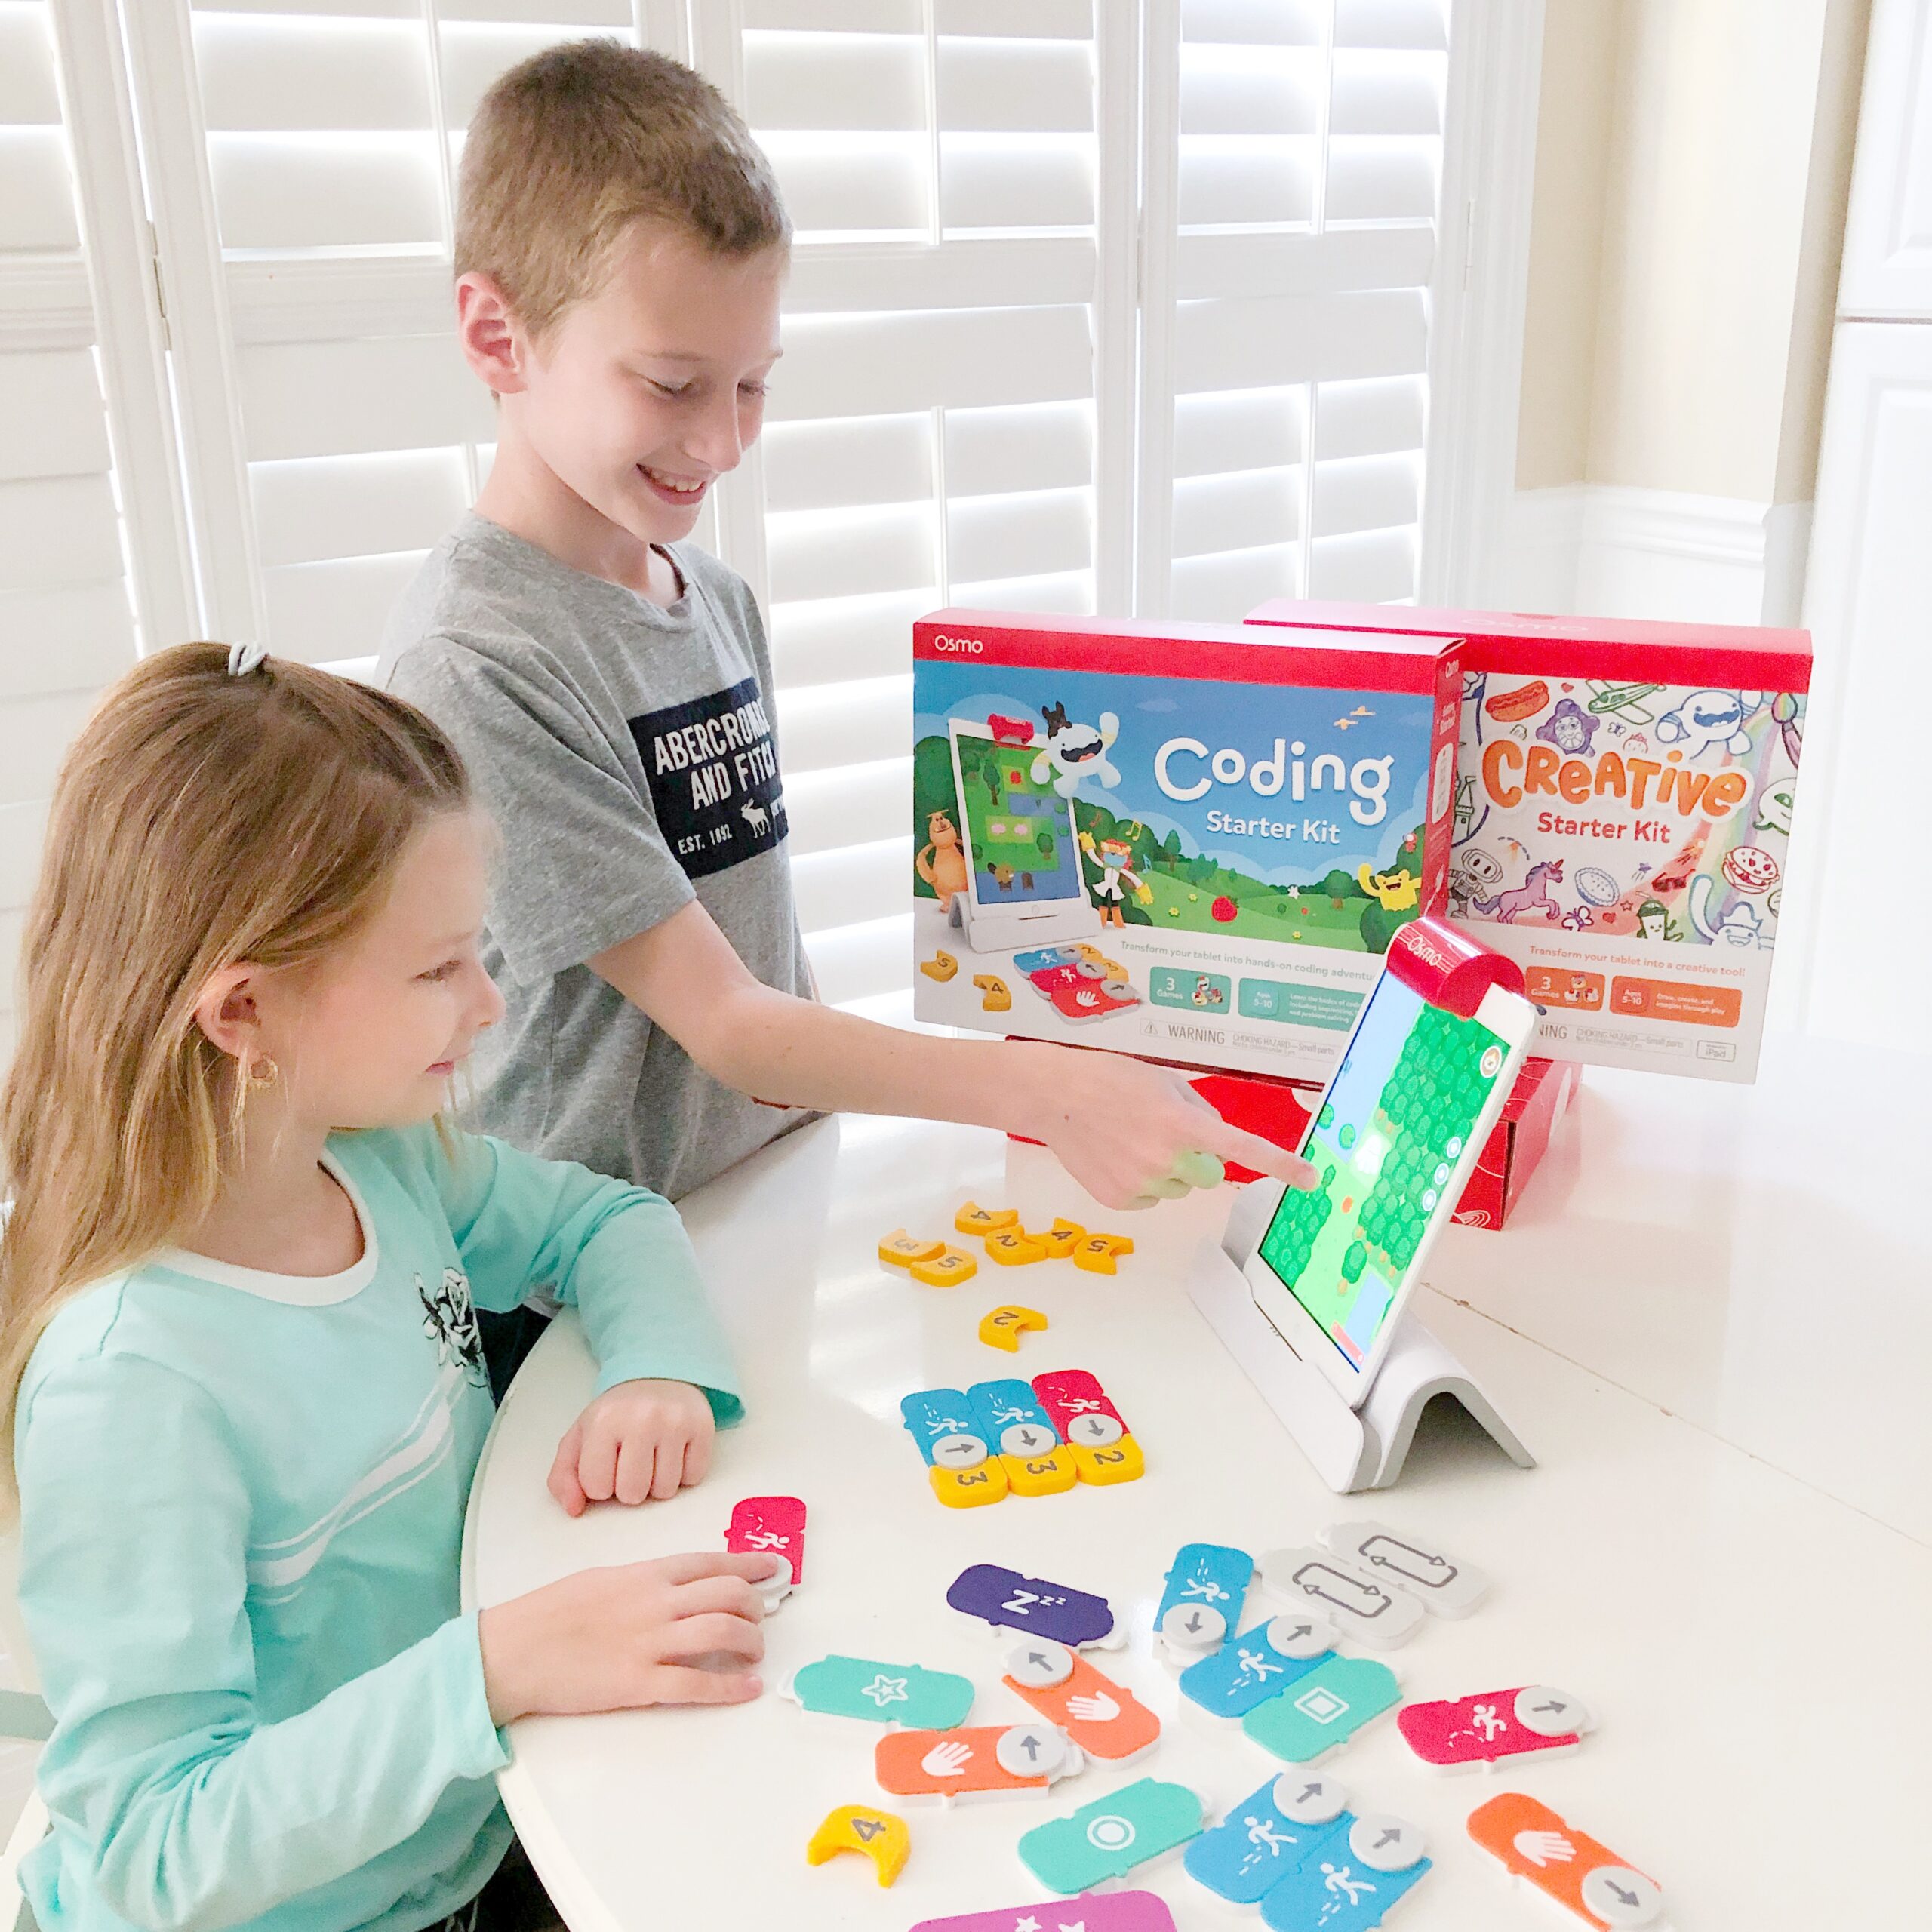 Review: Osmo Creative & Coding Starter Kit